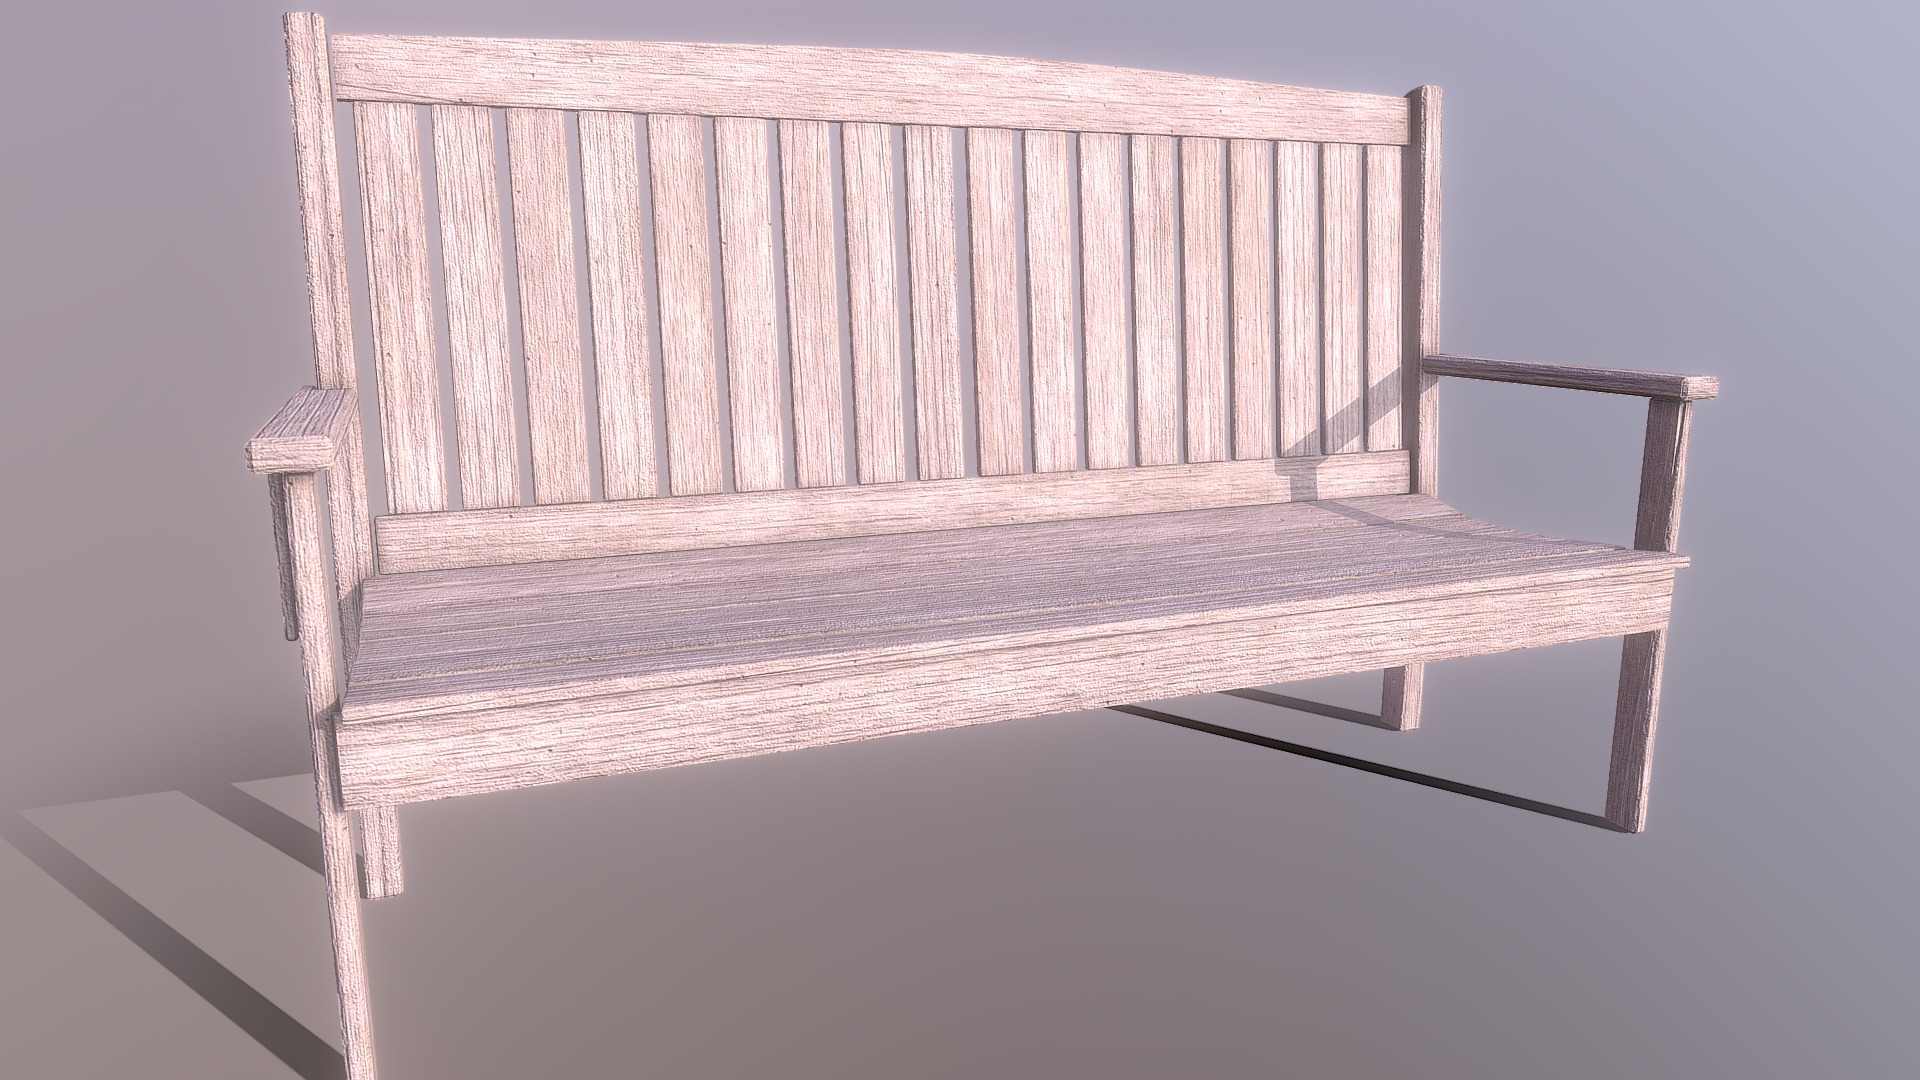 3D model Superfuntimes Simple Deck Bench! - This is a 3D model of the Superfuntimes Simple Deck Bench!. The 3D model is about a bench in a room.